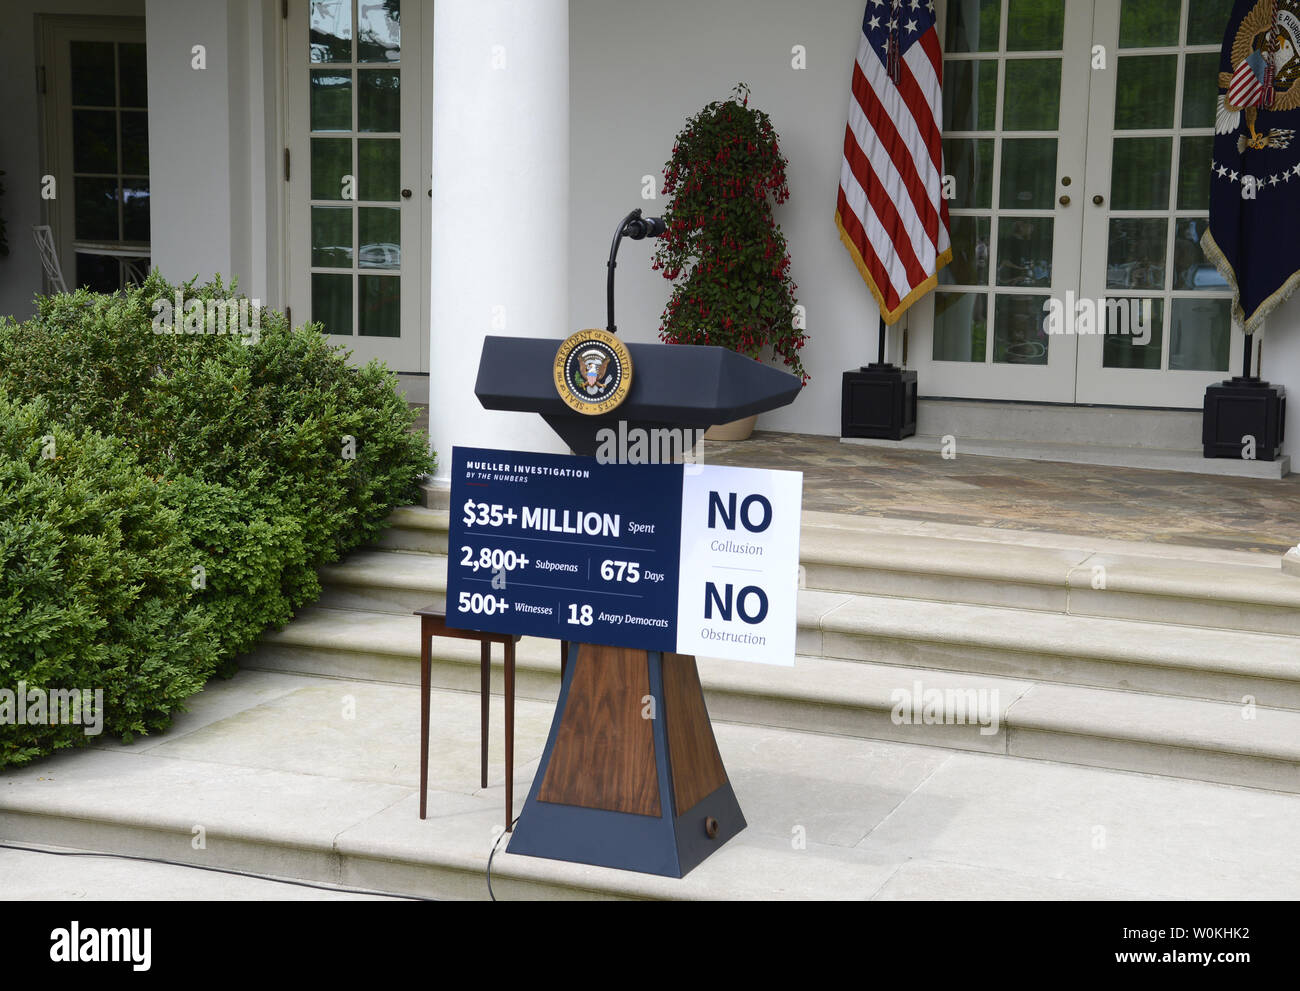 The lecturn with a poster awaits the arrival of President Donald Trump for remarks to the press in the Rose Garden of the White House, Washington, DC, May 22, 2019. A scheduled meeting to discuss infrastructure programs broke down according to Trump when Democratic leaders brought up the Special Counsel Mueller investigation.                       Photo by Mike Theiler/UPI Stock Photo